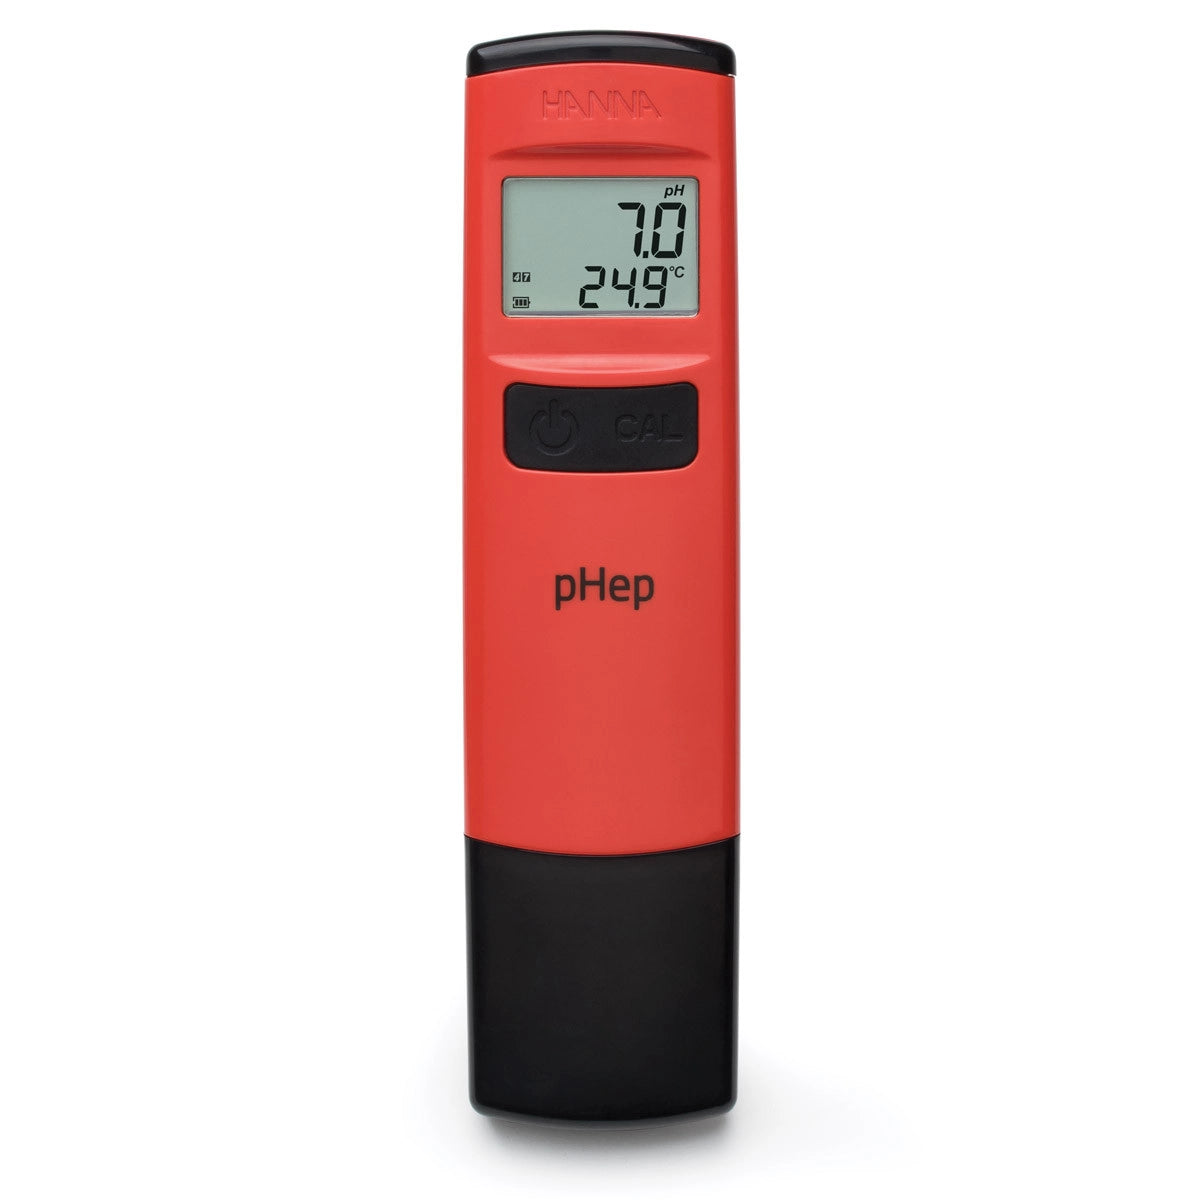 A Hanna Waterproof Pocket pH Tester by TAS on a white background.